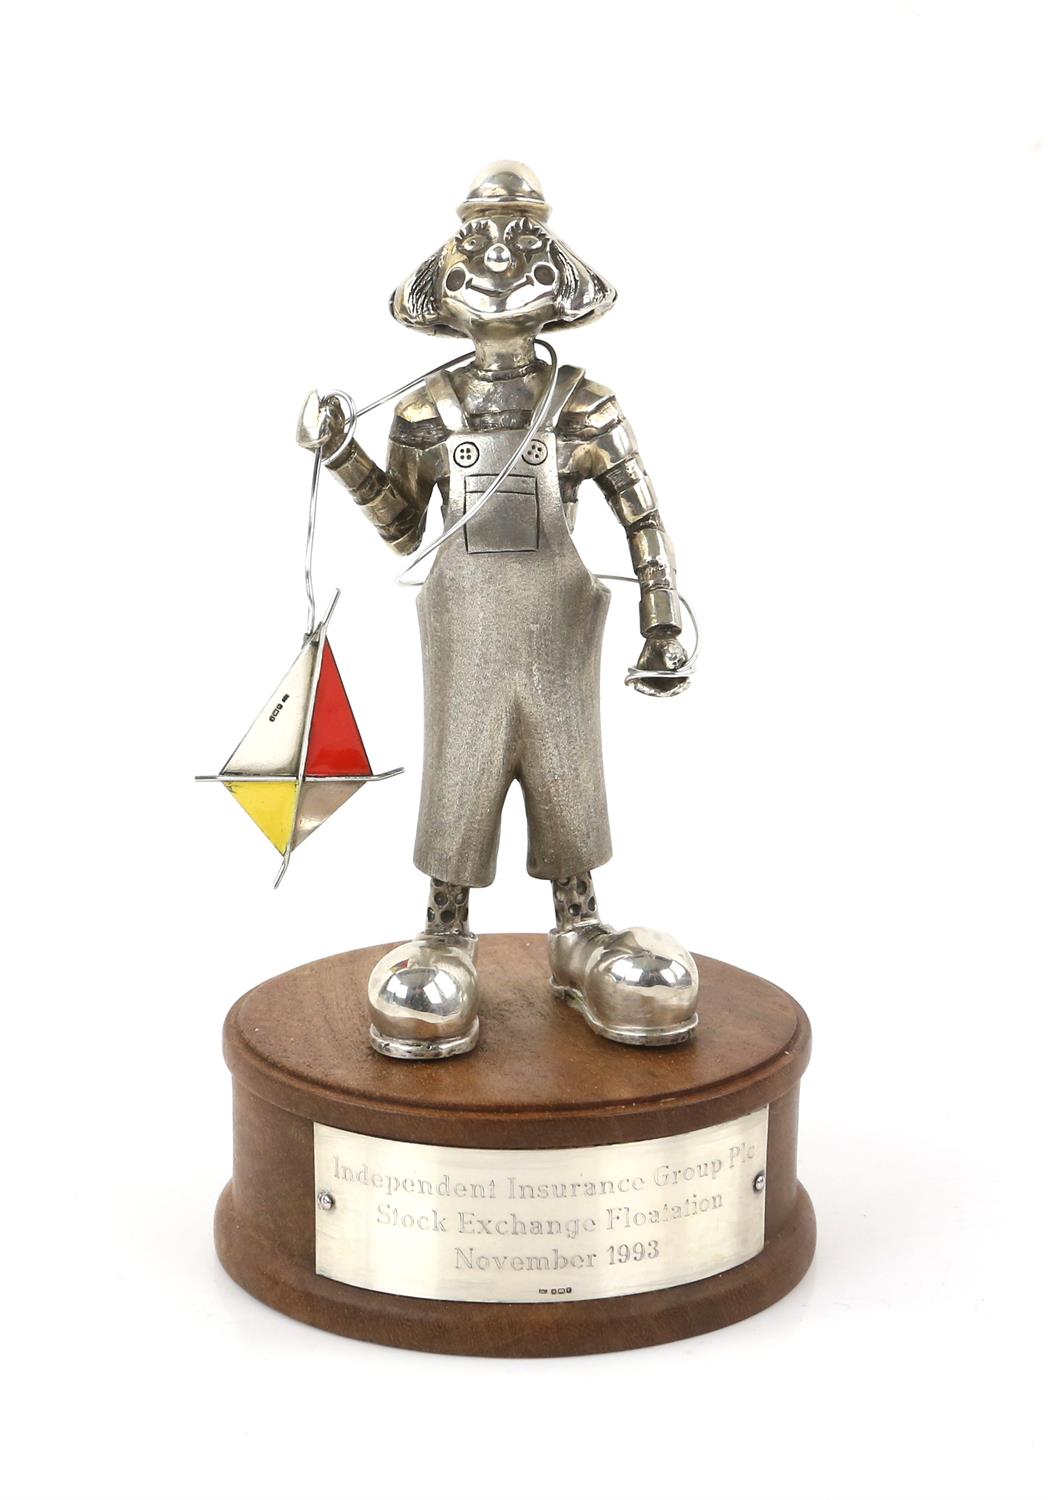 Silver and enamel clown with a kite, by Eaton & Jones, Tenterden, Sheffield 1993 to commemorate the